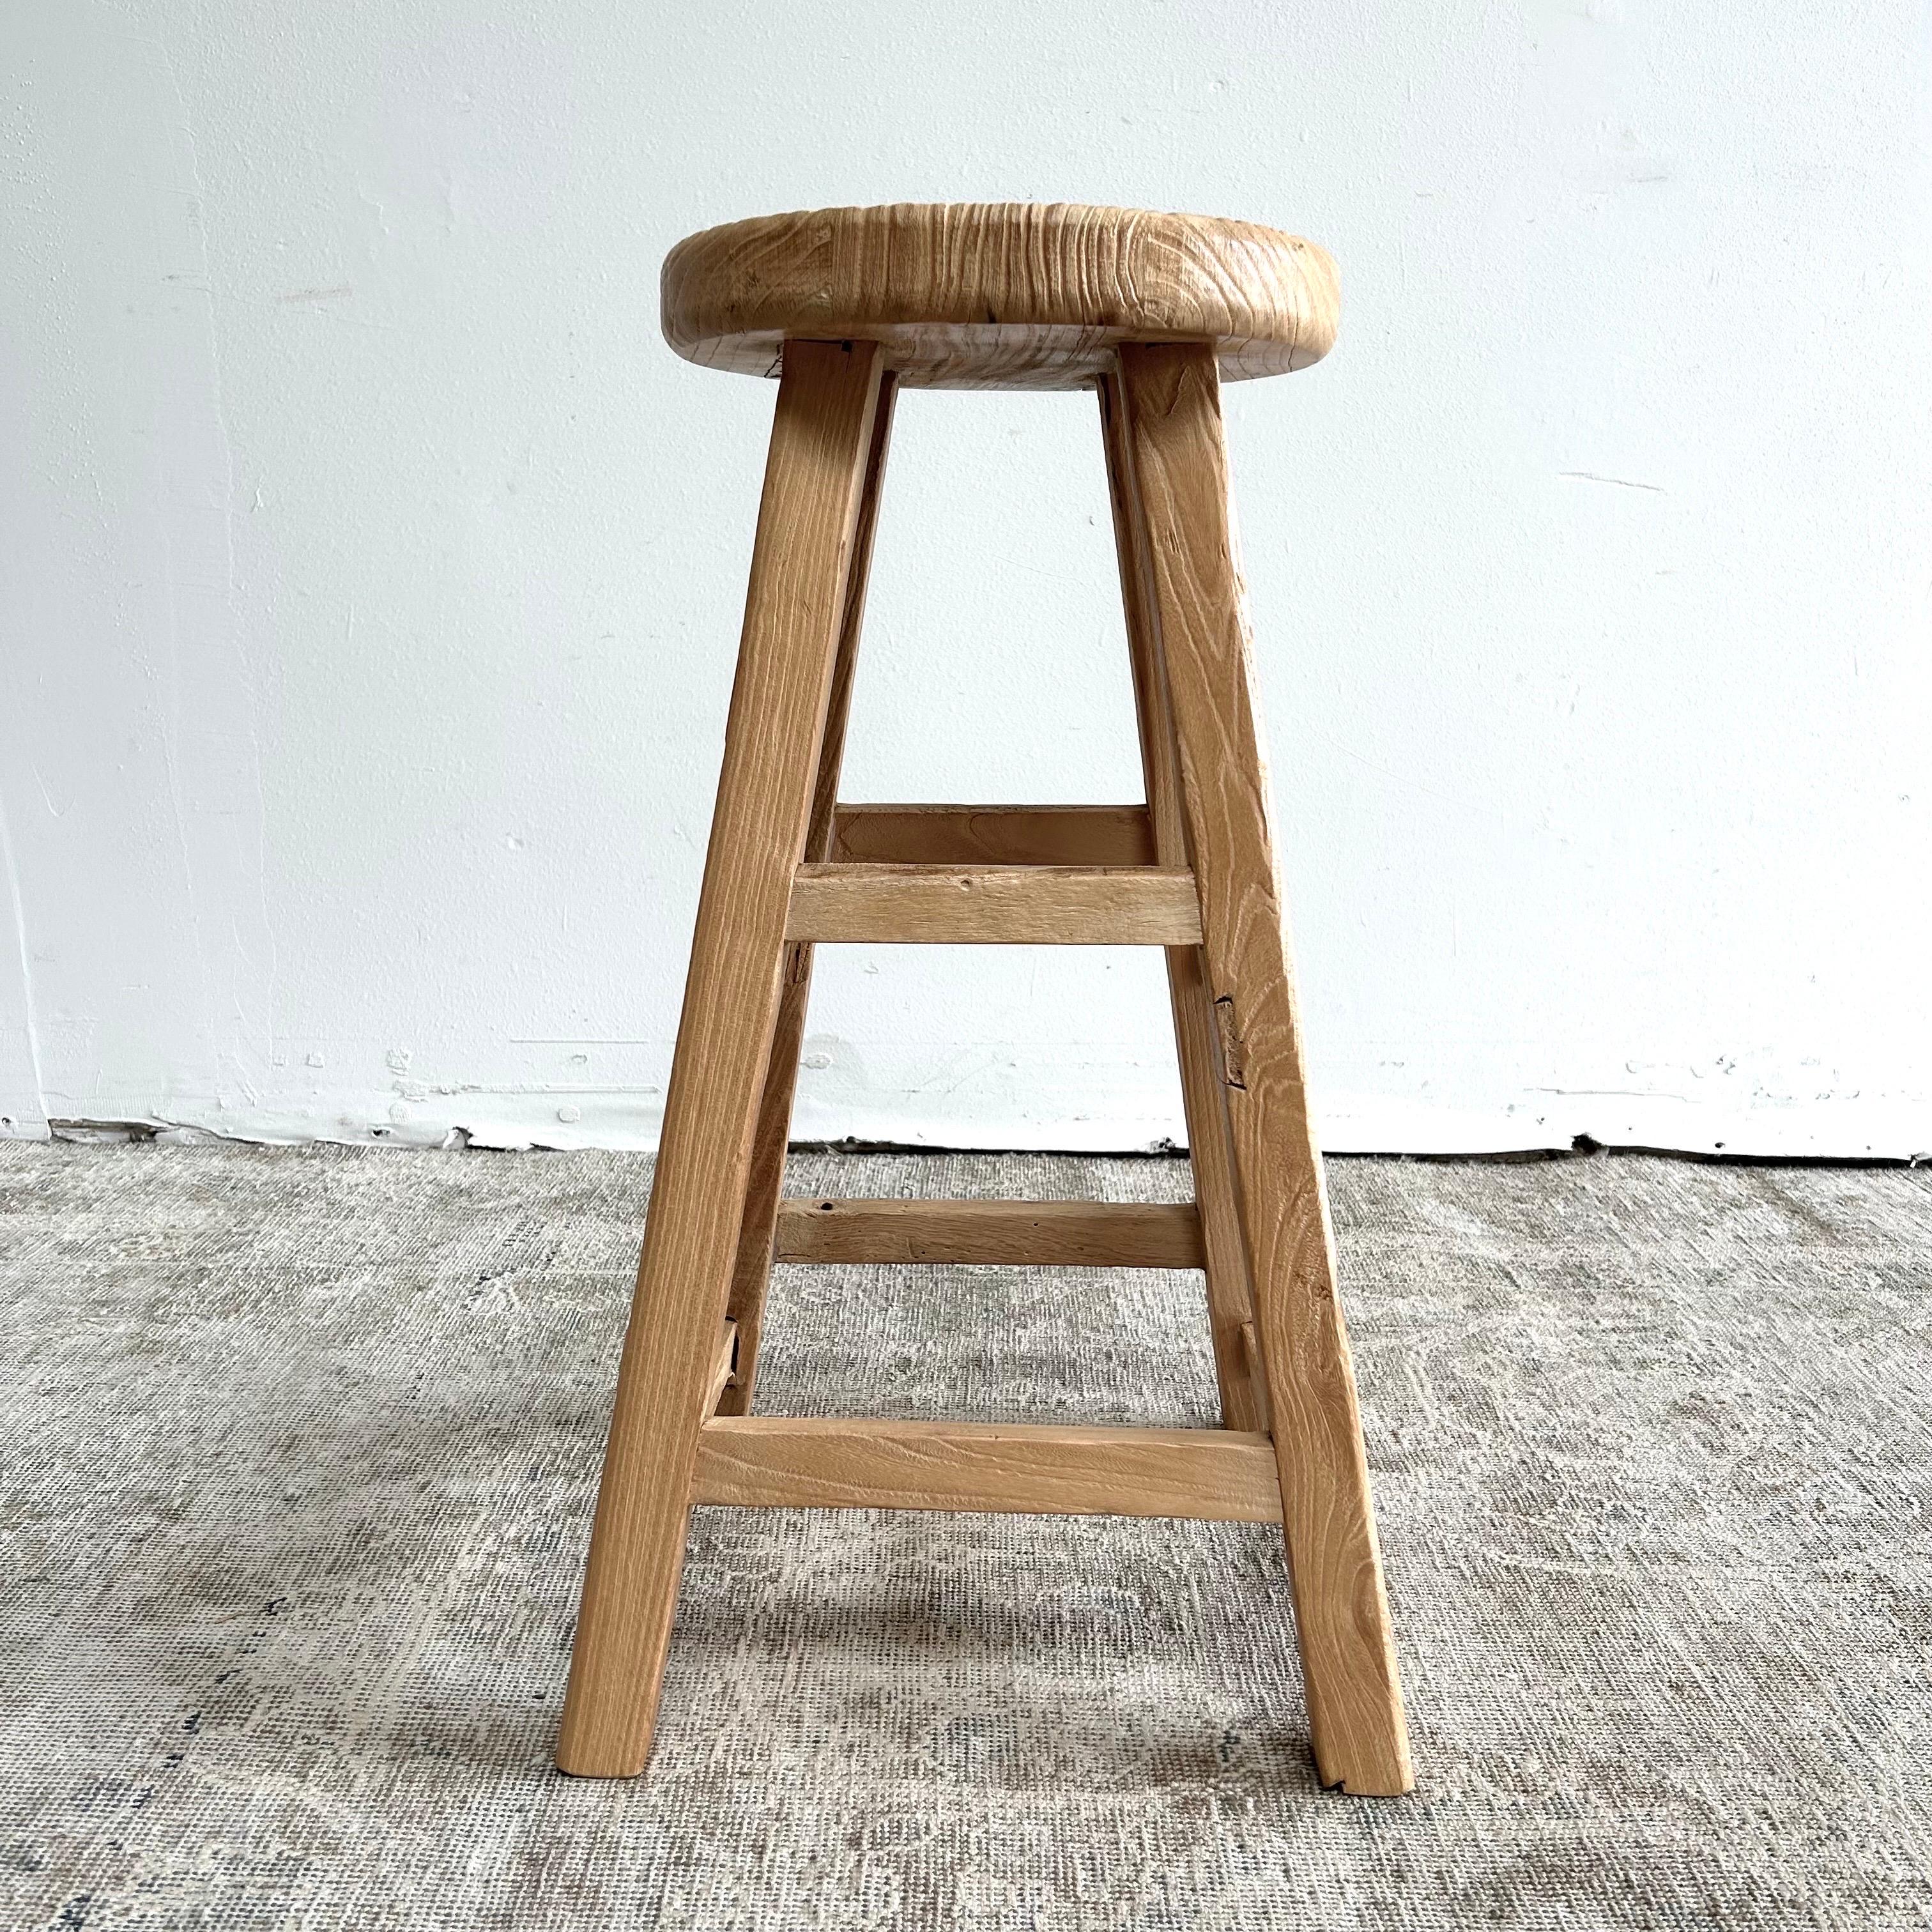 Custom made bloom home Inc Elm wood counter height stools
these are solid and sturdy ready for daily use. Each piece is truly unique and one of a kind with different characteristics in the wood as these are made from reclaimed elm wood